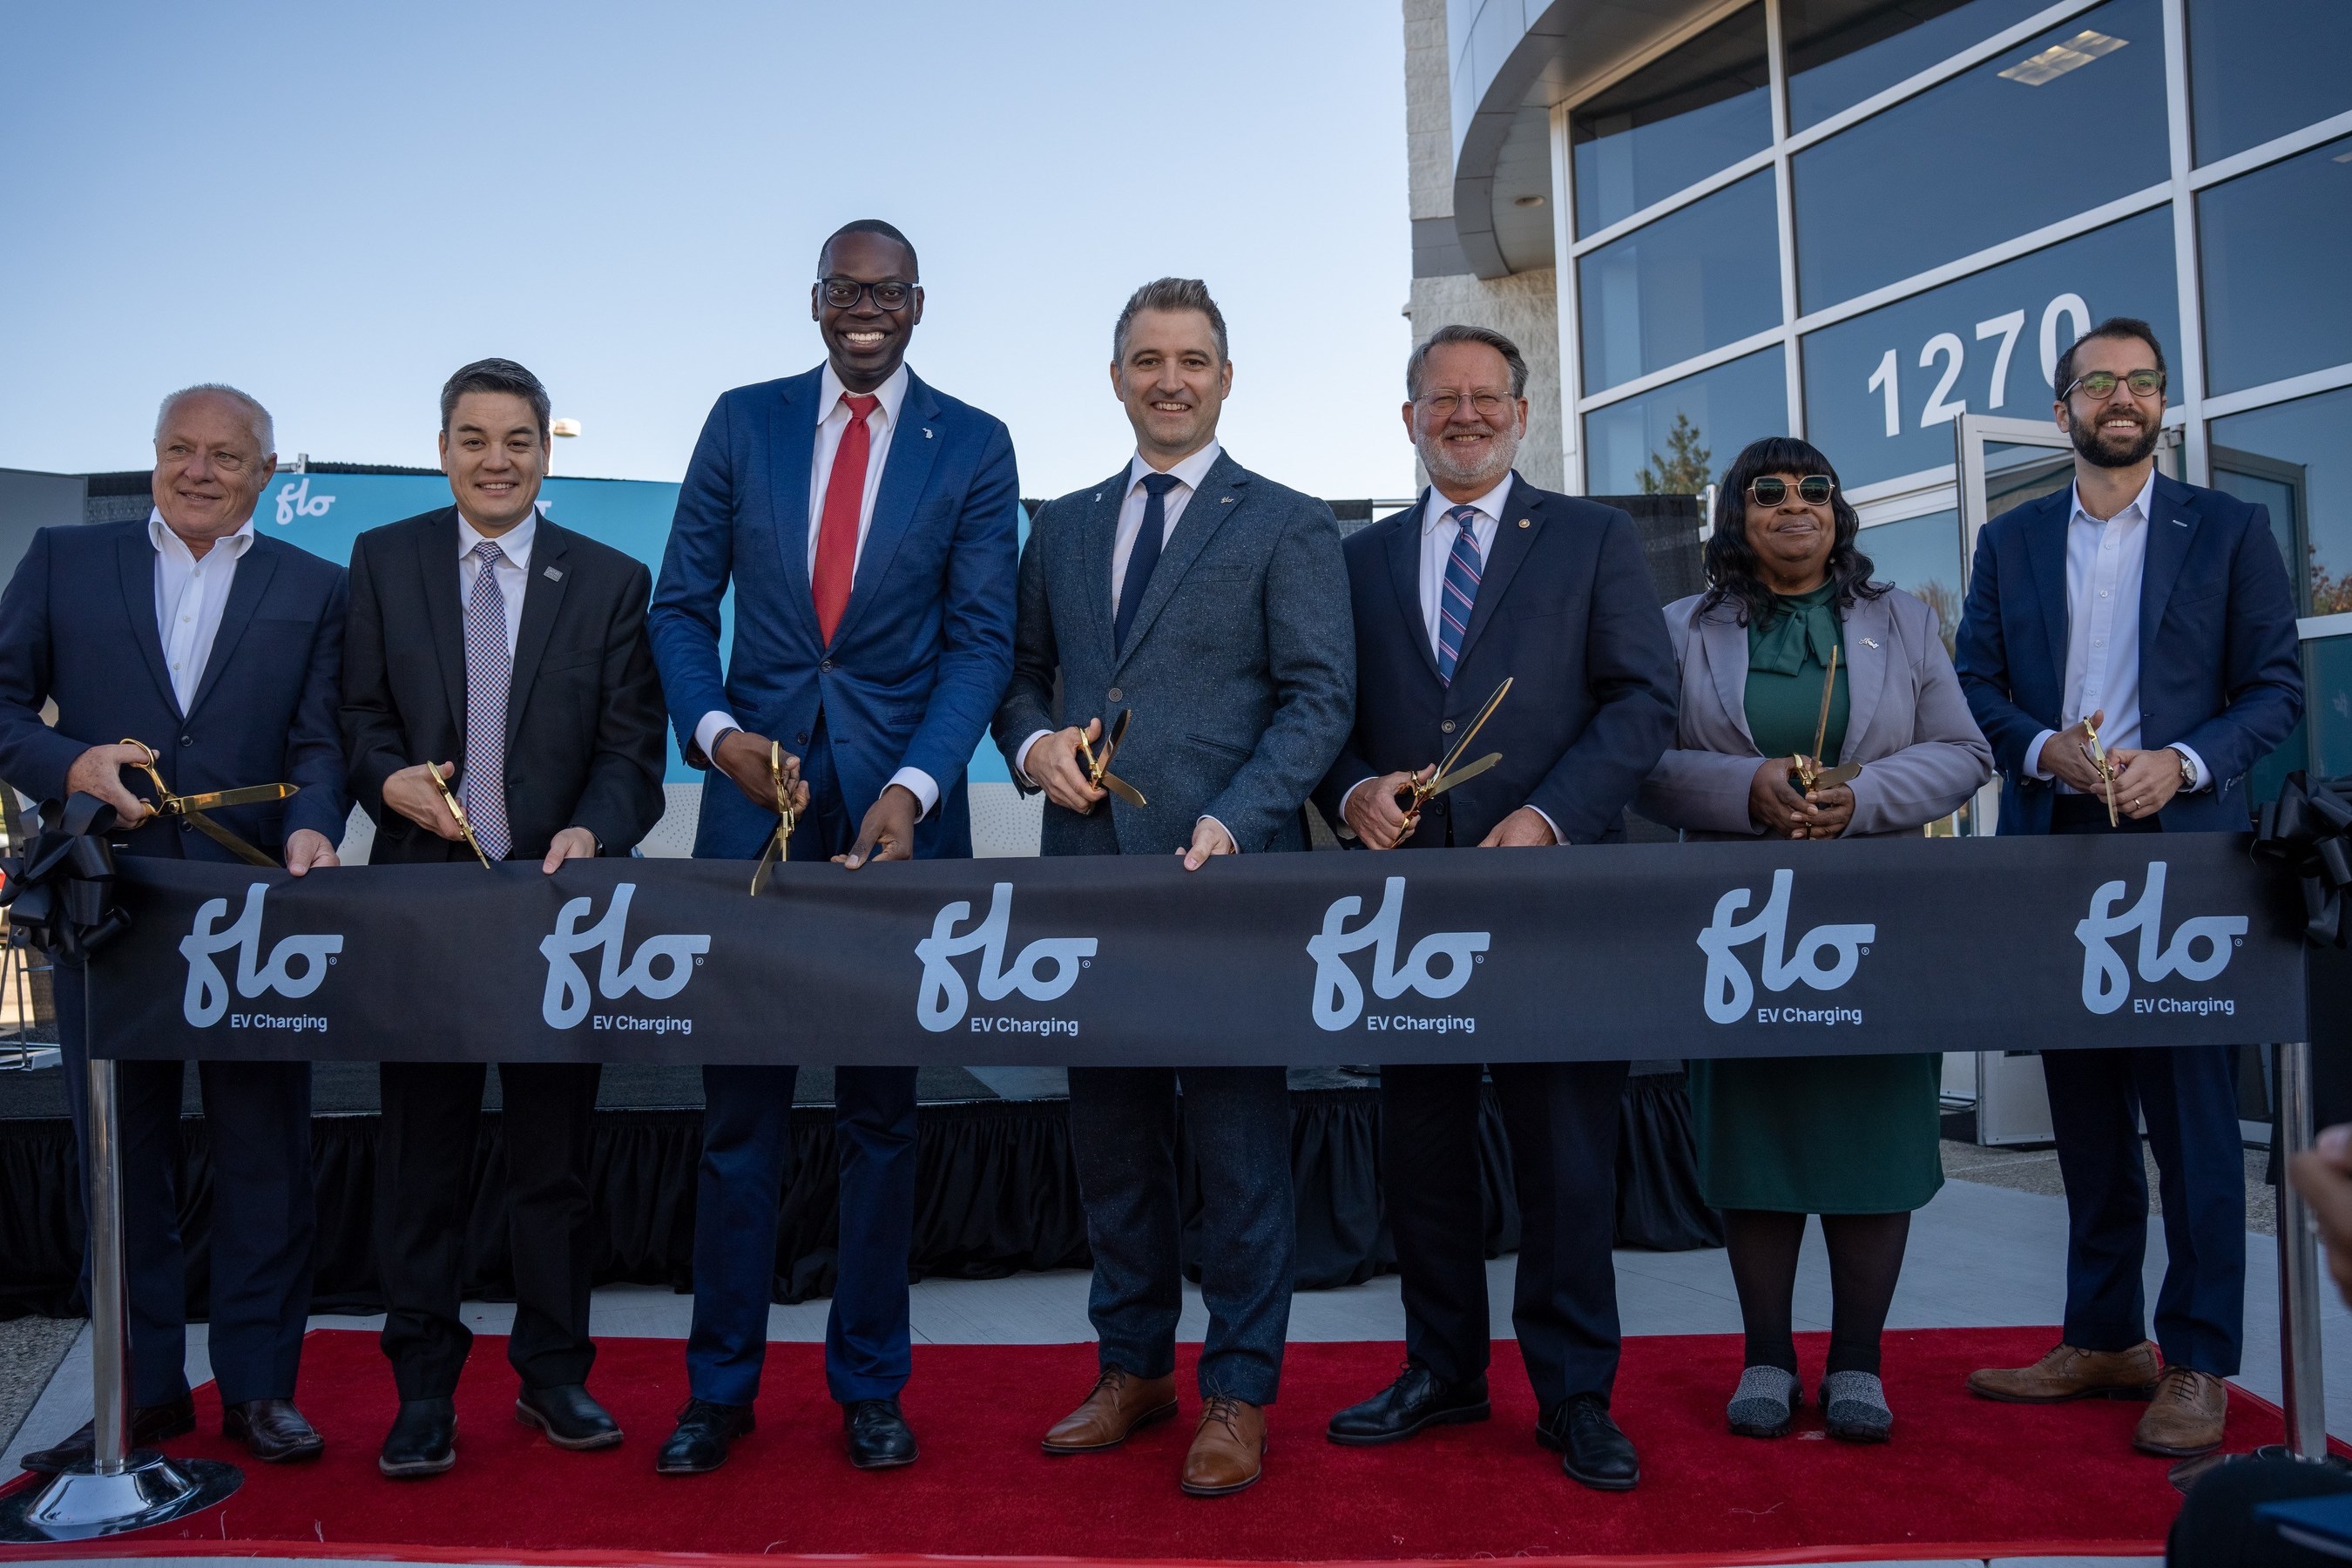 The ribbon cutting ceremony at Flo's new facility in Auburn Hills, Michigan (CNW Group/Flo)